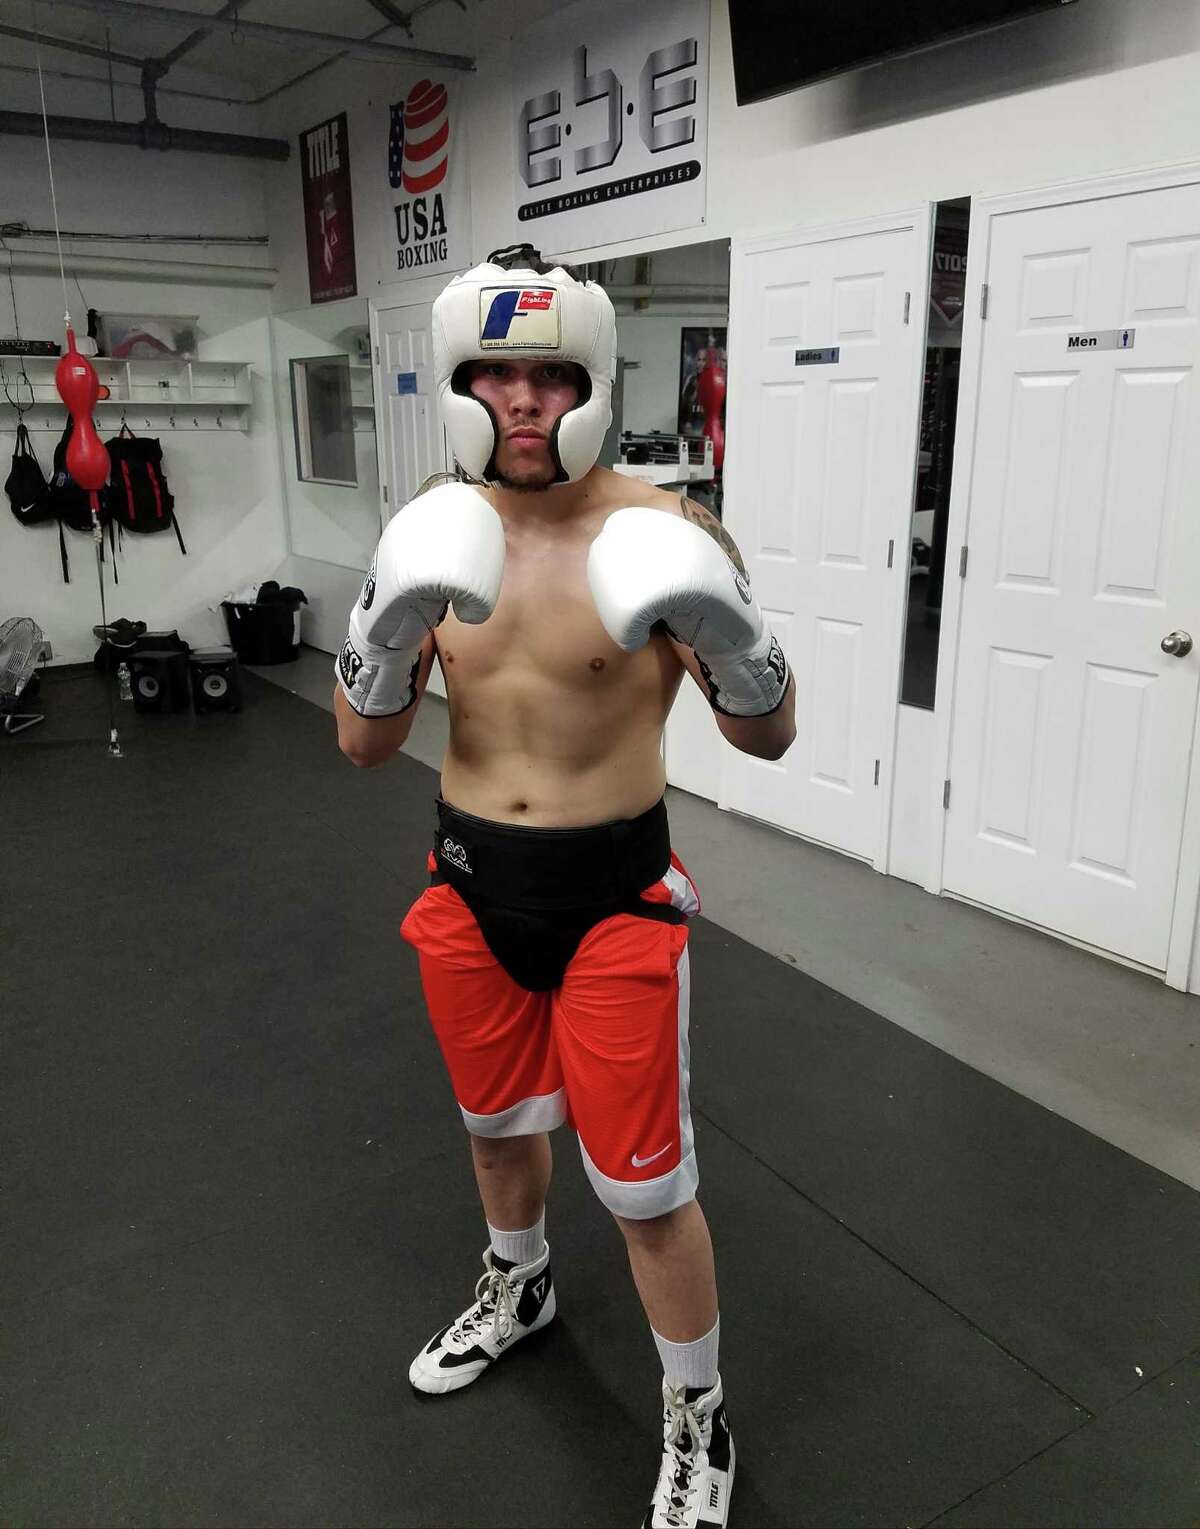 Danbury's Edgar Escribano, 23, will compete in the 165-pound novice division at the 2017 Ringside World Championships, which take place next week in Missouri